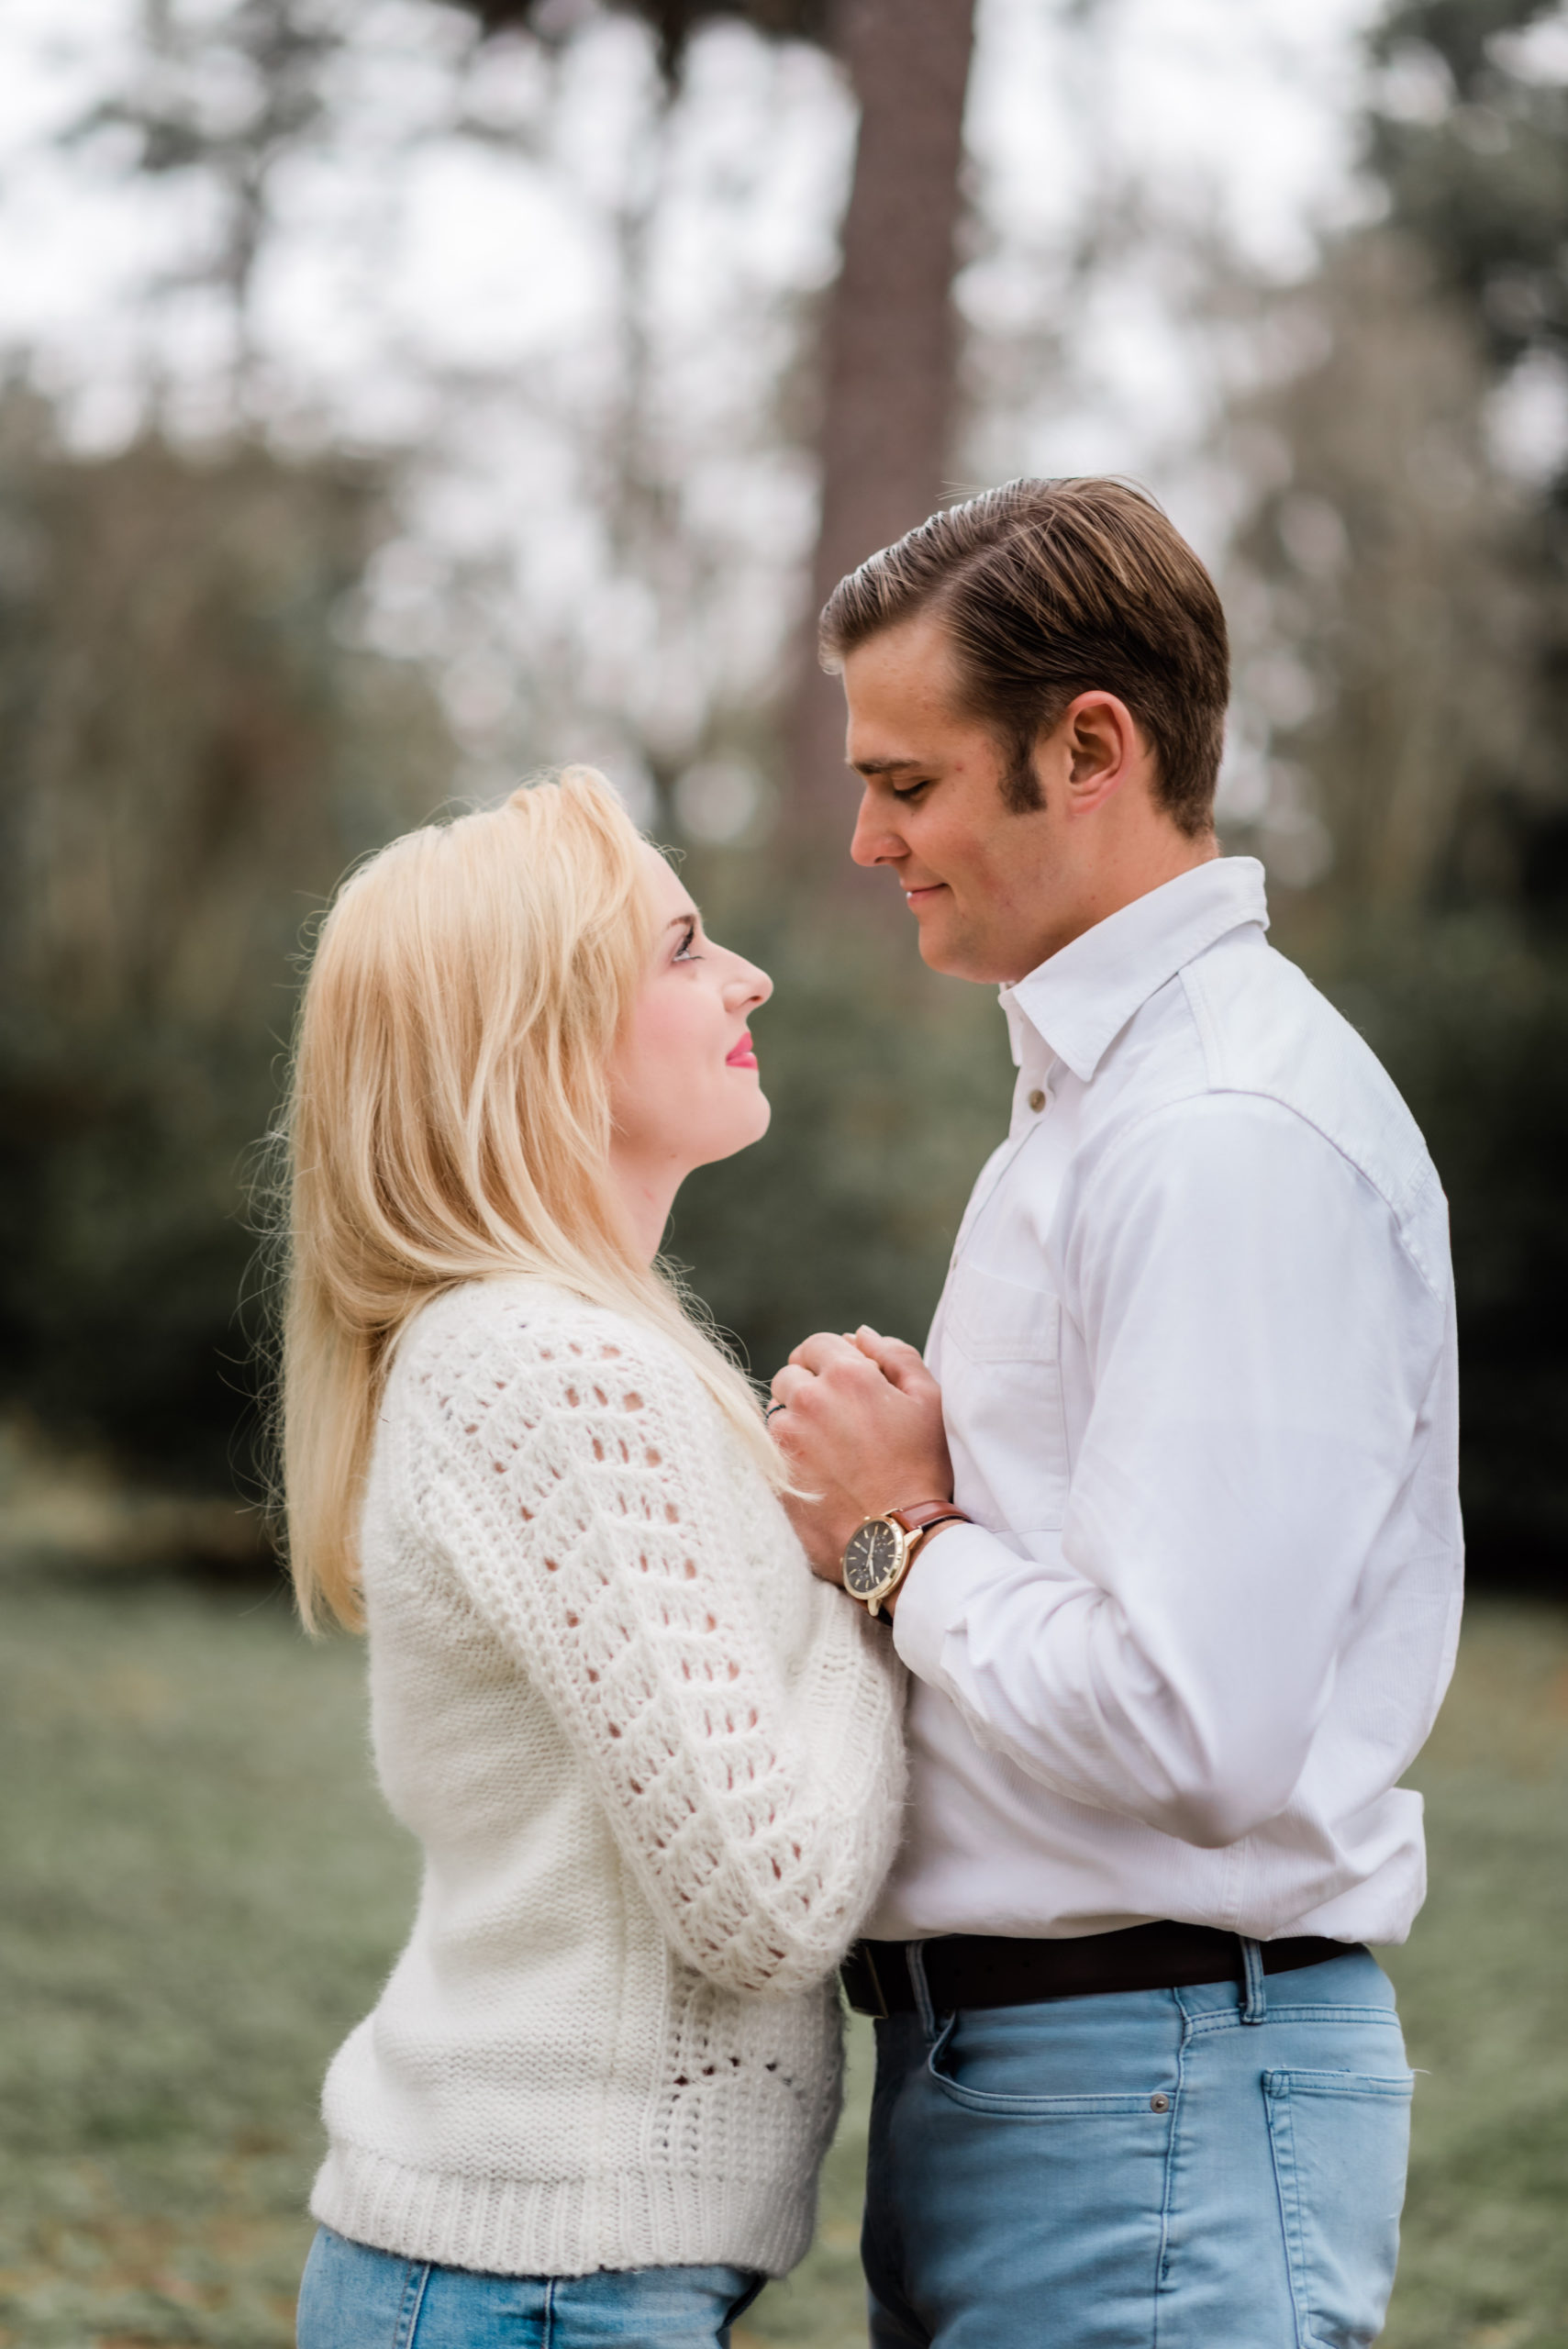 engagement photos at heritage park and gardens in live oak Florida by Black tie and co